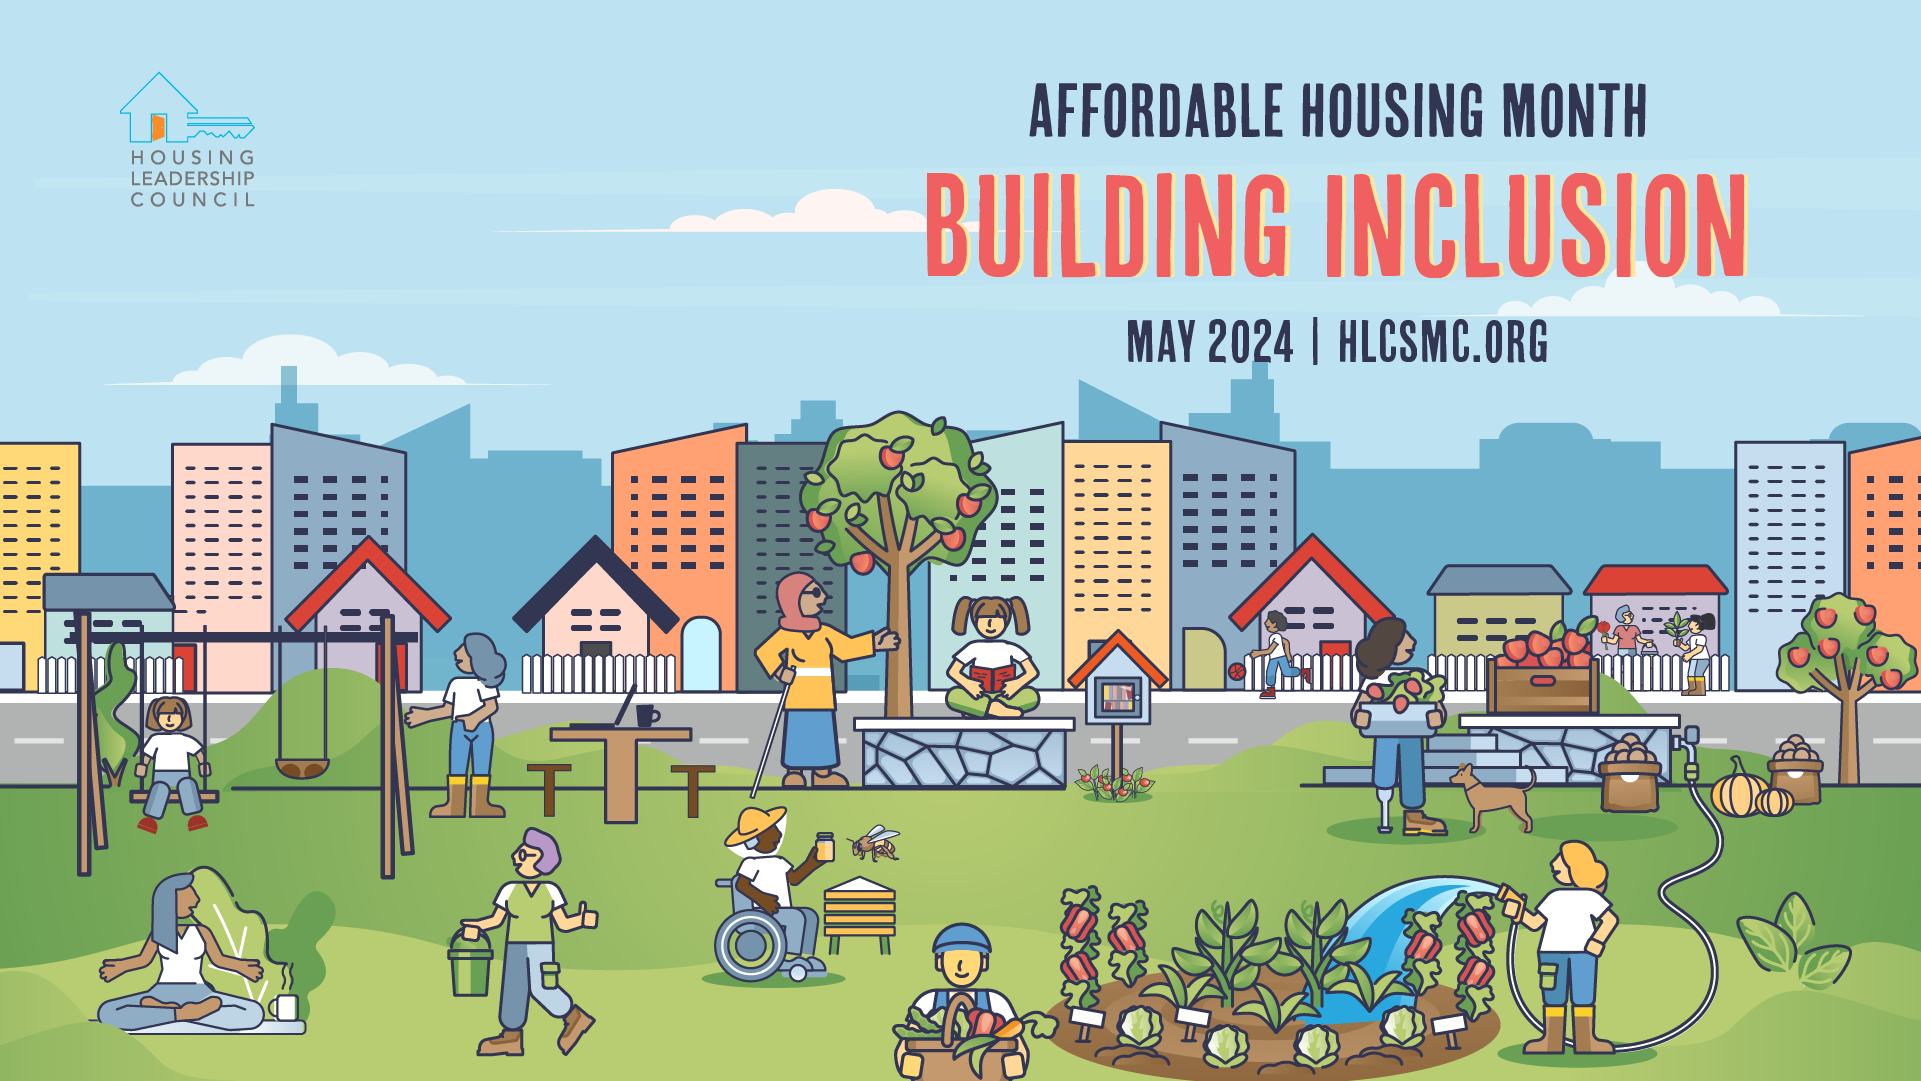 Affordable Housing Month – Housing Leadership Council of San Mateo County